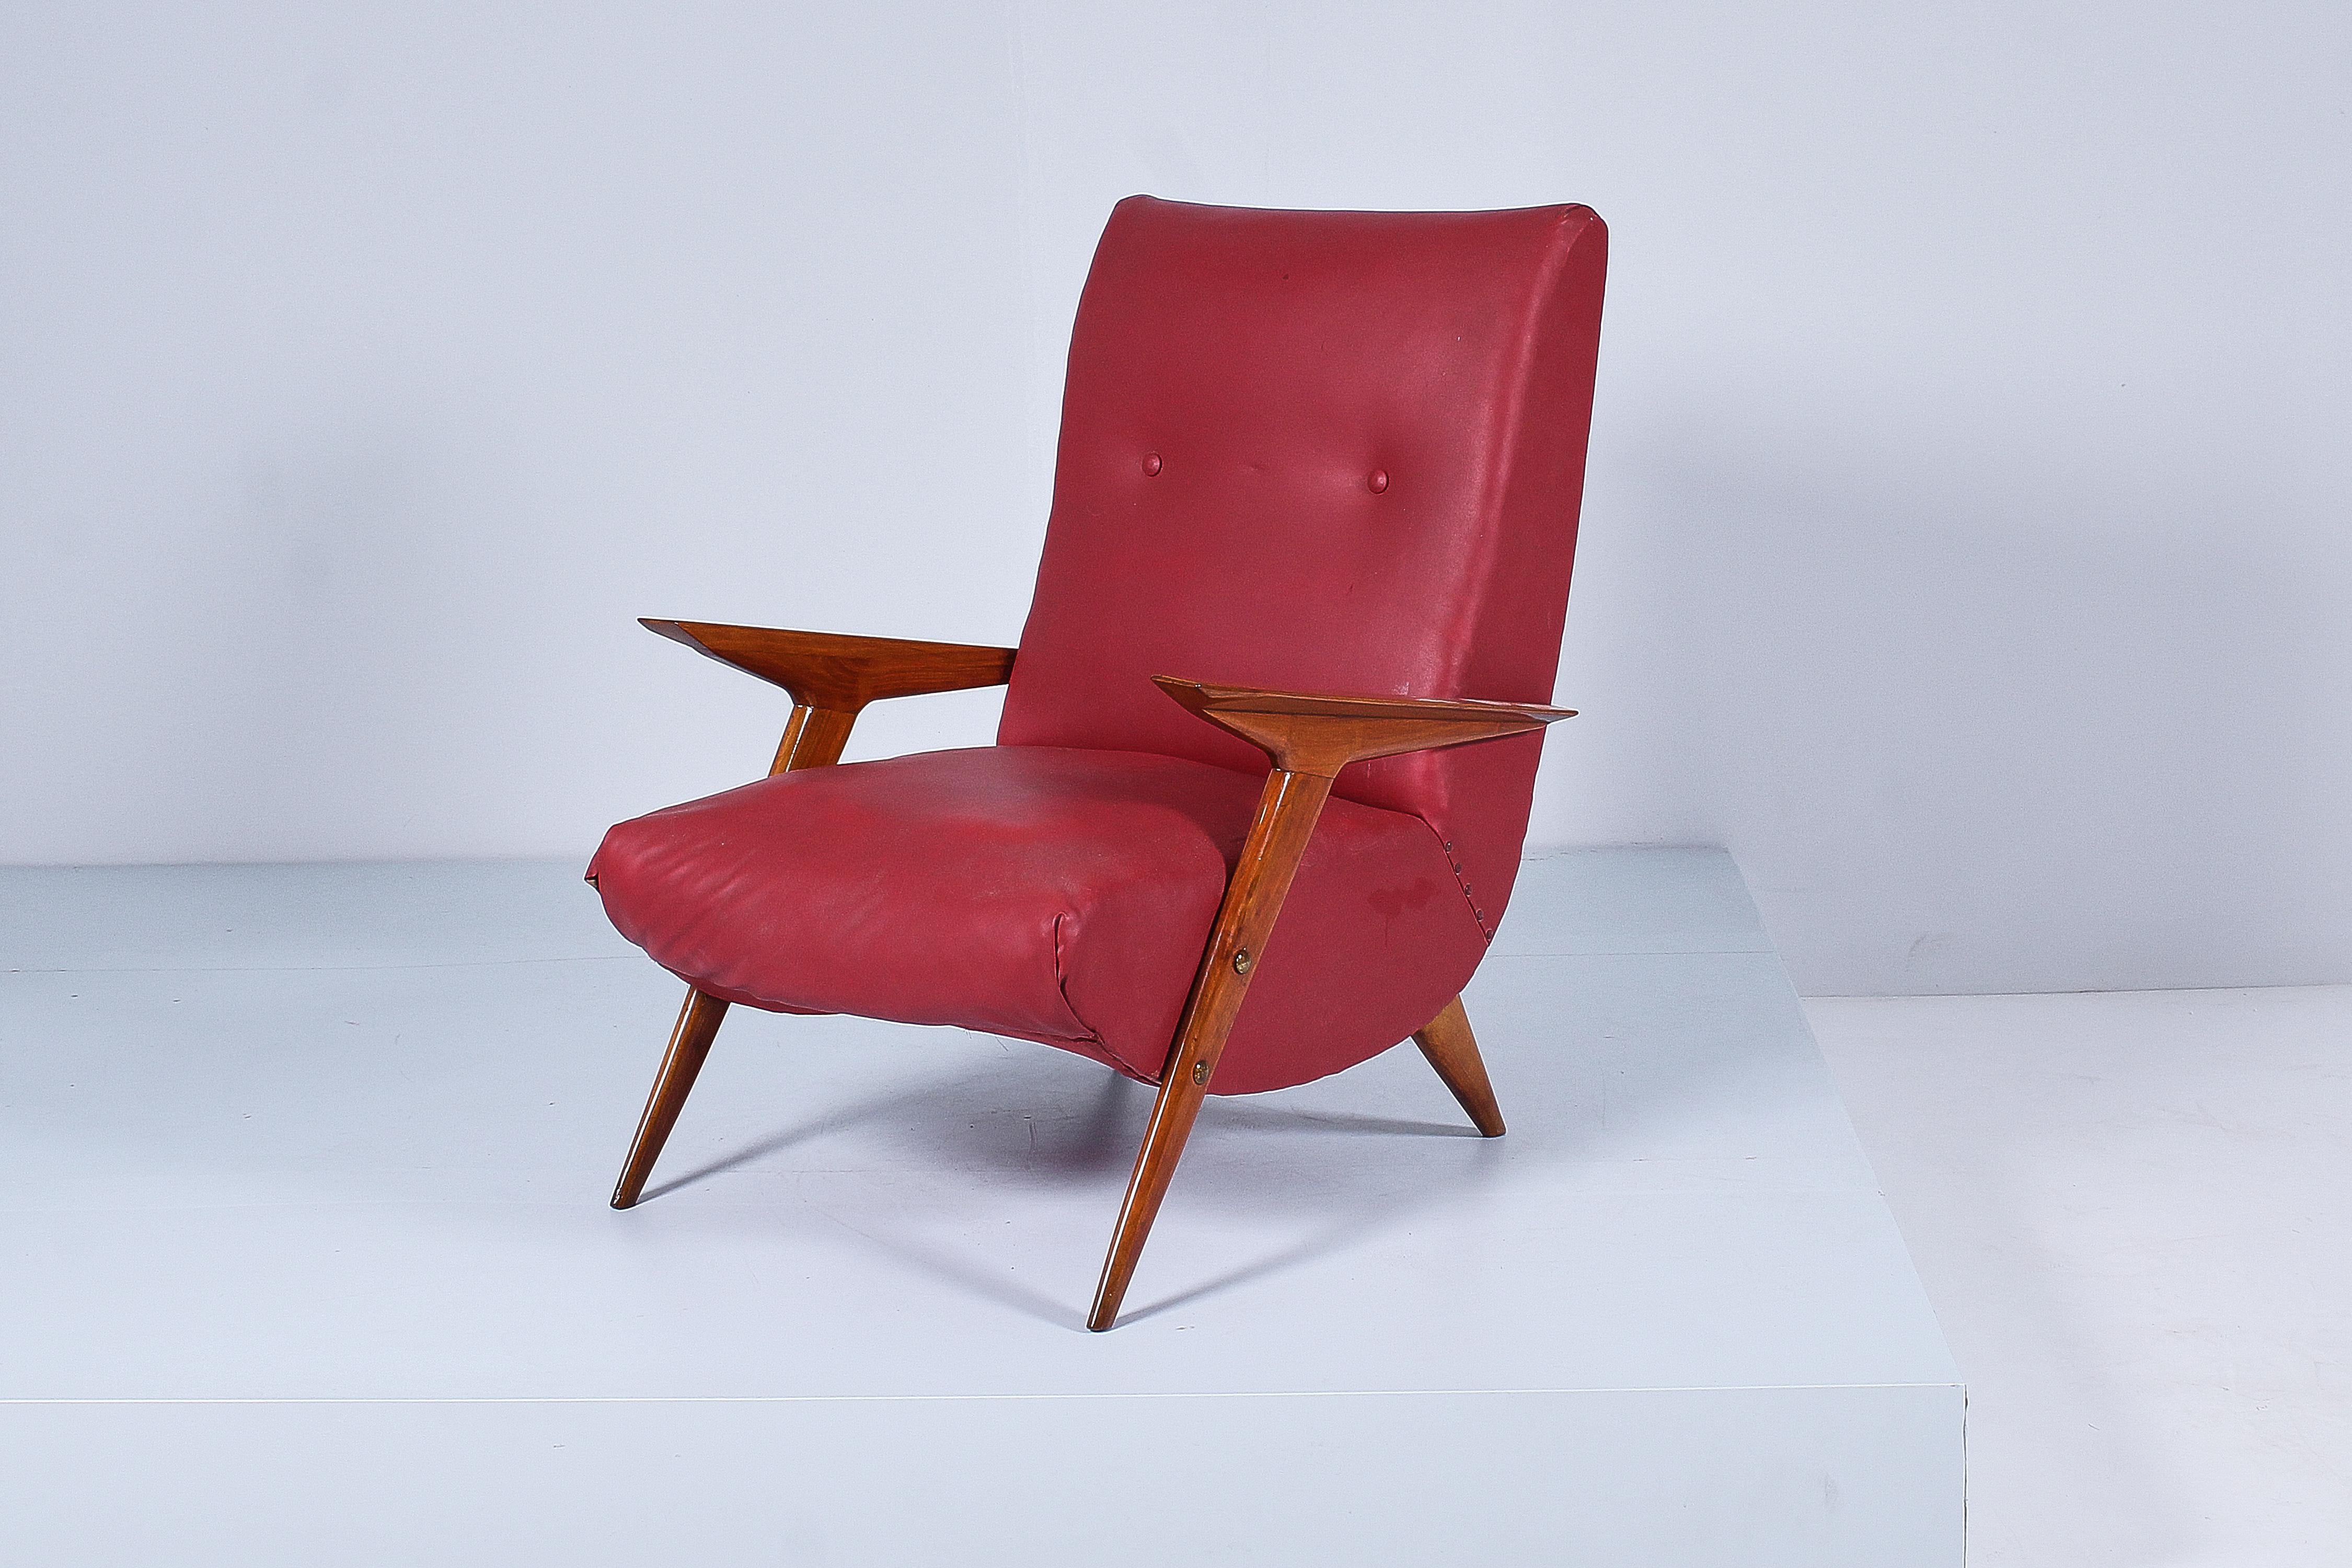 Mid-Century C. Graffi (attr.) Shaped Wood and Red Leather Armchair 50s Italy  For Sale 2